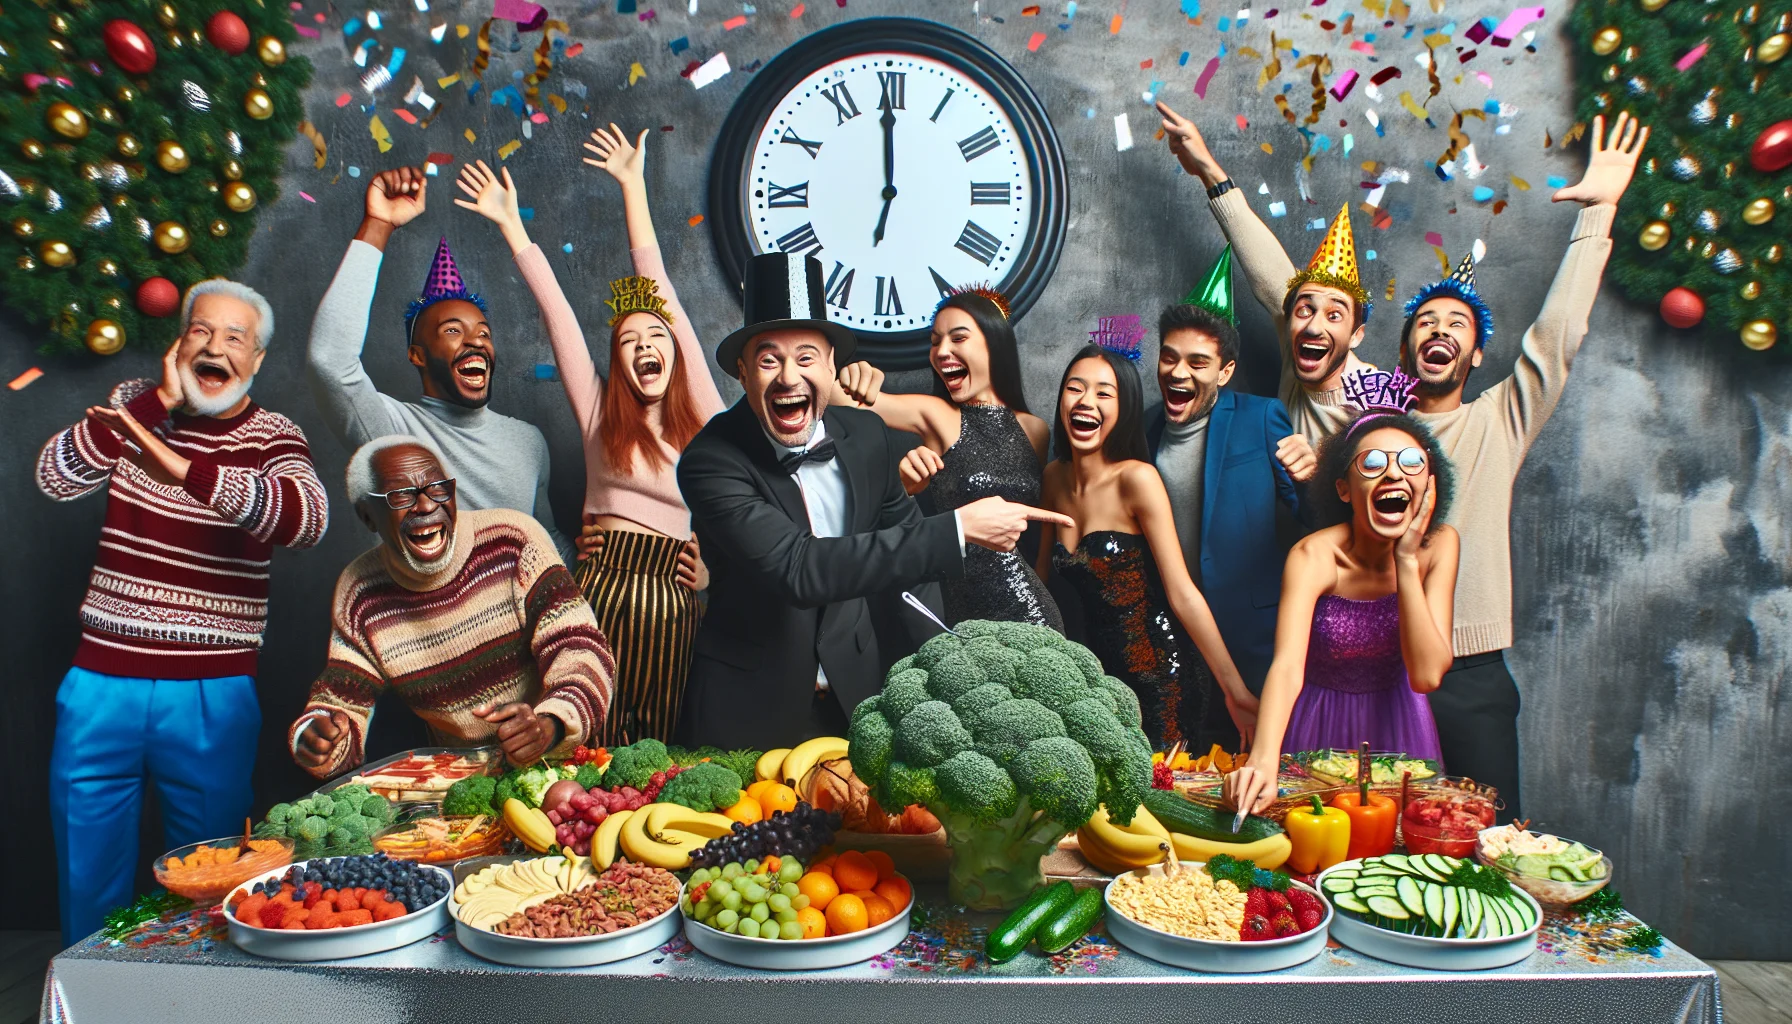 Create an image depicting a creative and humorous New Year celebration. Feature a festive environment with a large wall clock striking midnight, confetti, and a crowd of excited people. Include a range of individuals, such as a Caucasian man, a Hispanic woman, a Middle-Eastern teenager, and a Black elderly woman, all in festive outfits. Introduce a funny twist: instead of ordinary party foods, show a large buffet table laden with colorful fruits, vegetables, and other healthy foods with price tags inexplicably low. In the foreground, have a laughing character pointing at a broccoli with a bargain price tag, expressing surprise and delight.